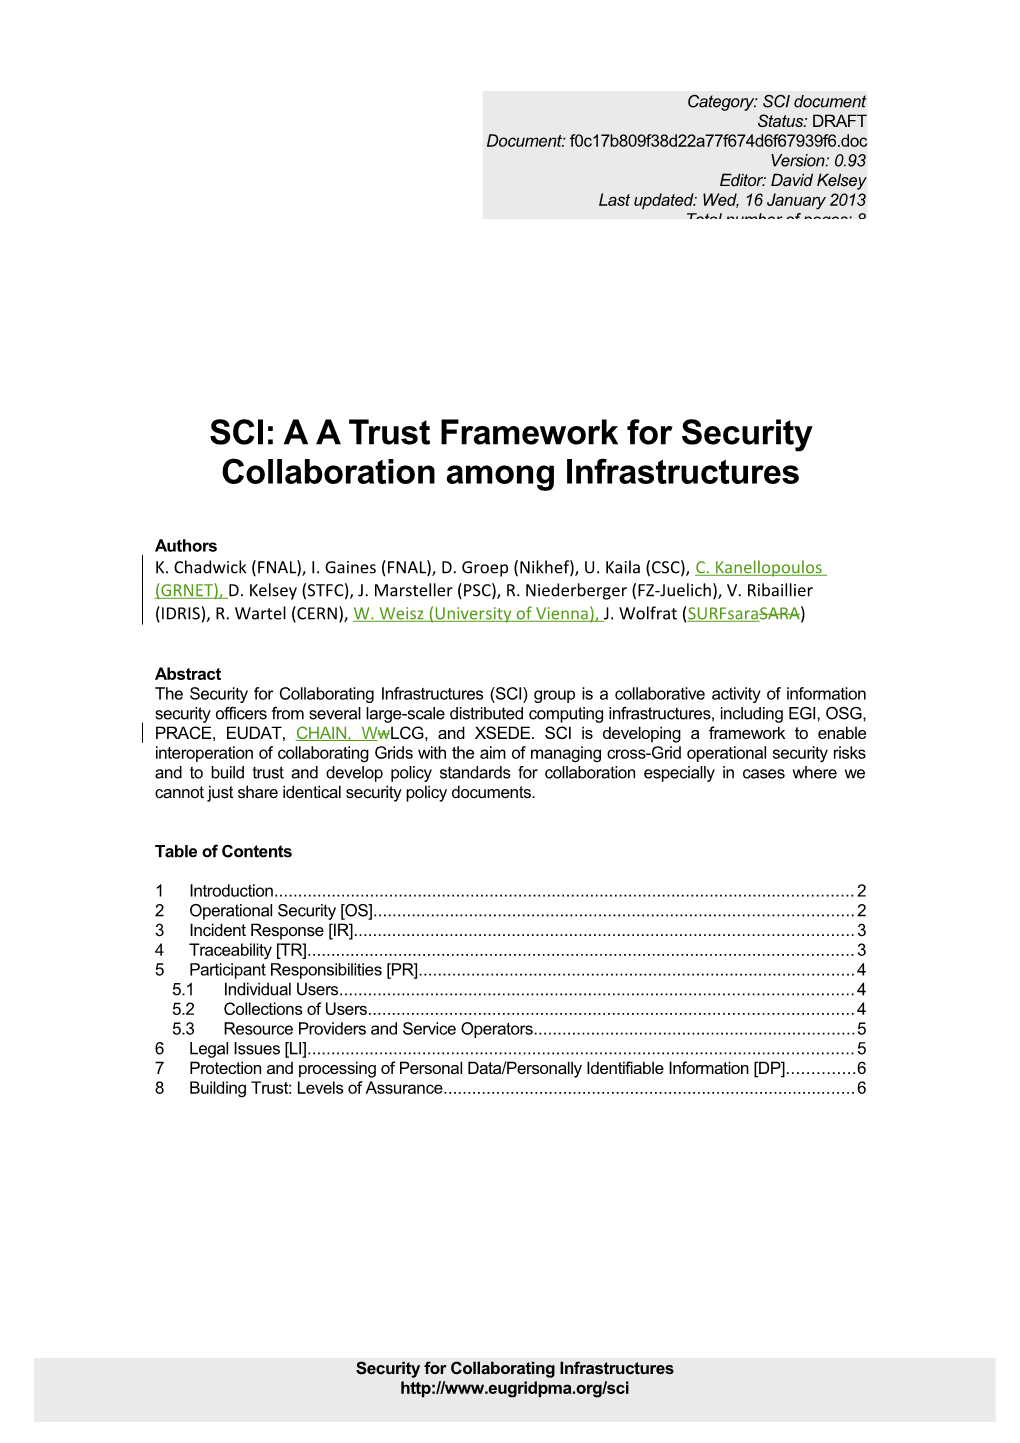 A Trust Framework for Security Collaboration Among Infrastructures